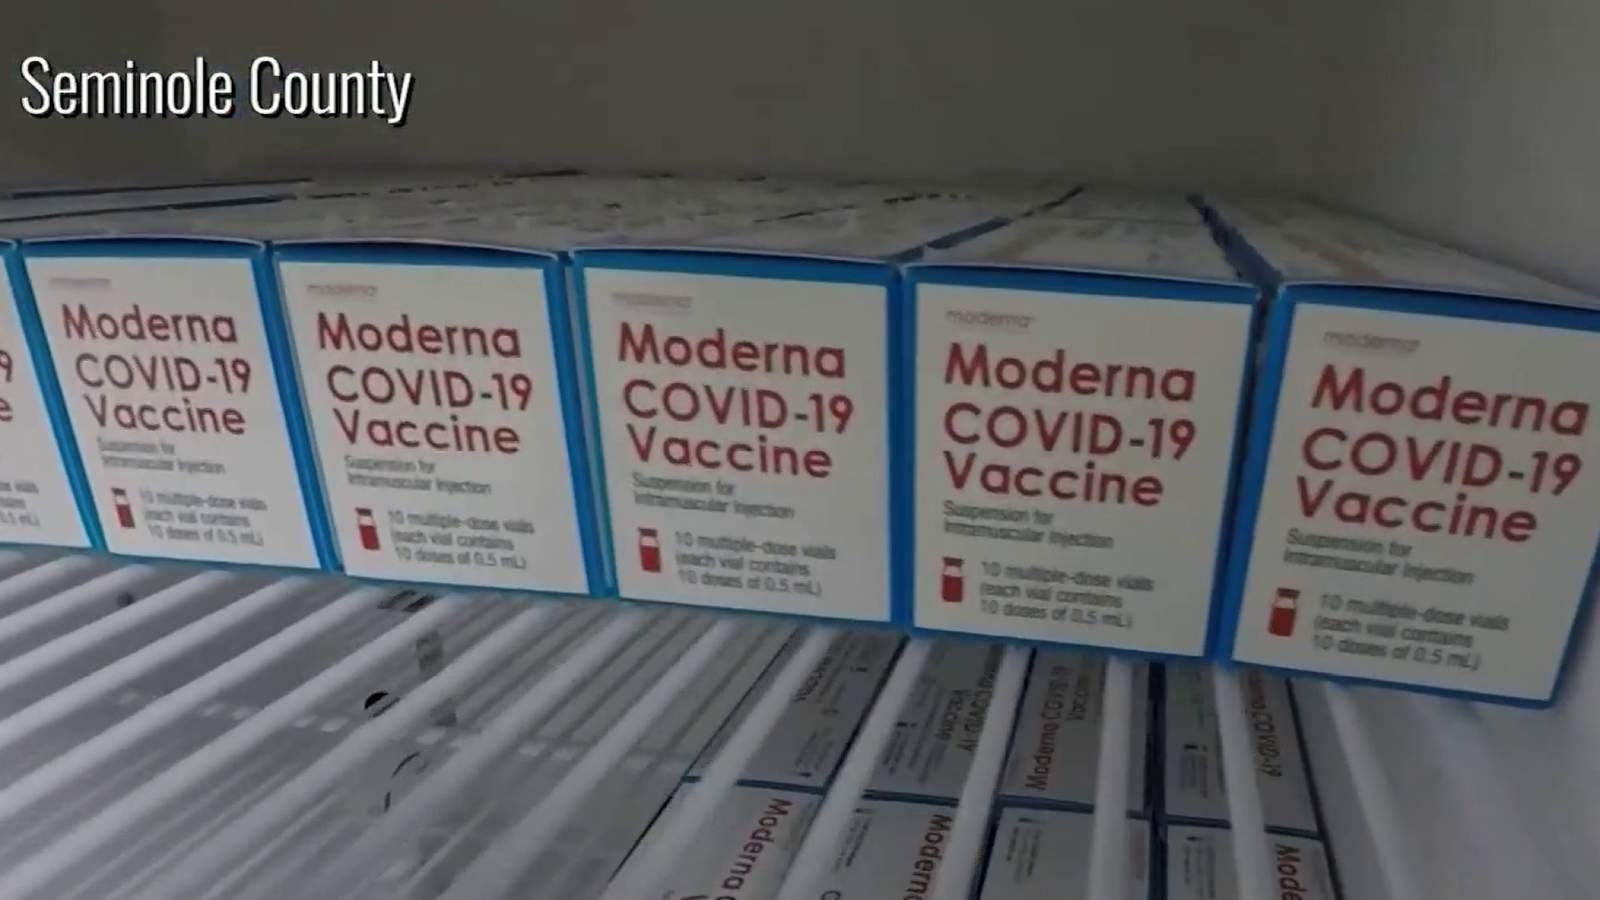 See how Seminole County residents aged 65 and over can plan to receive a COVID-19 vaccine